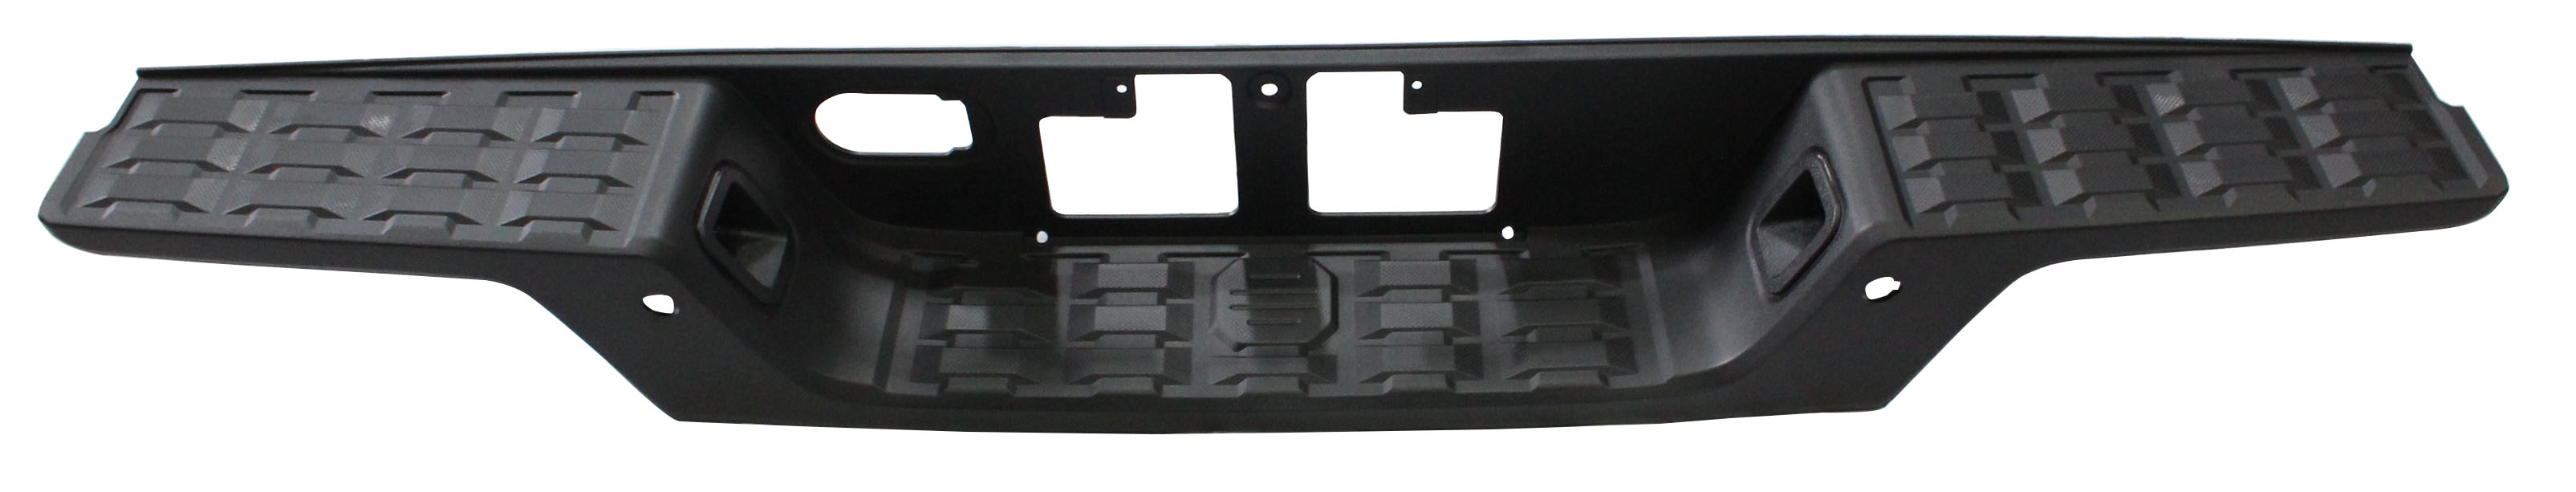 Aftermarket METAL REAR BUMPERS for TOYOTA - TACOMA, TACOMA,16-23,Rear bumper step pad